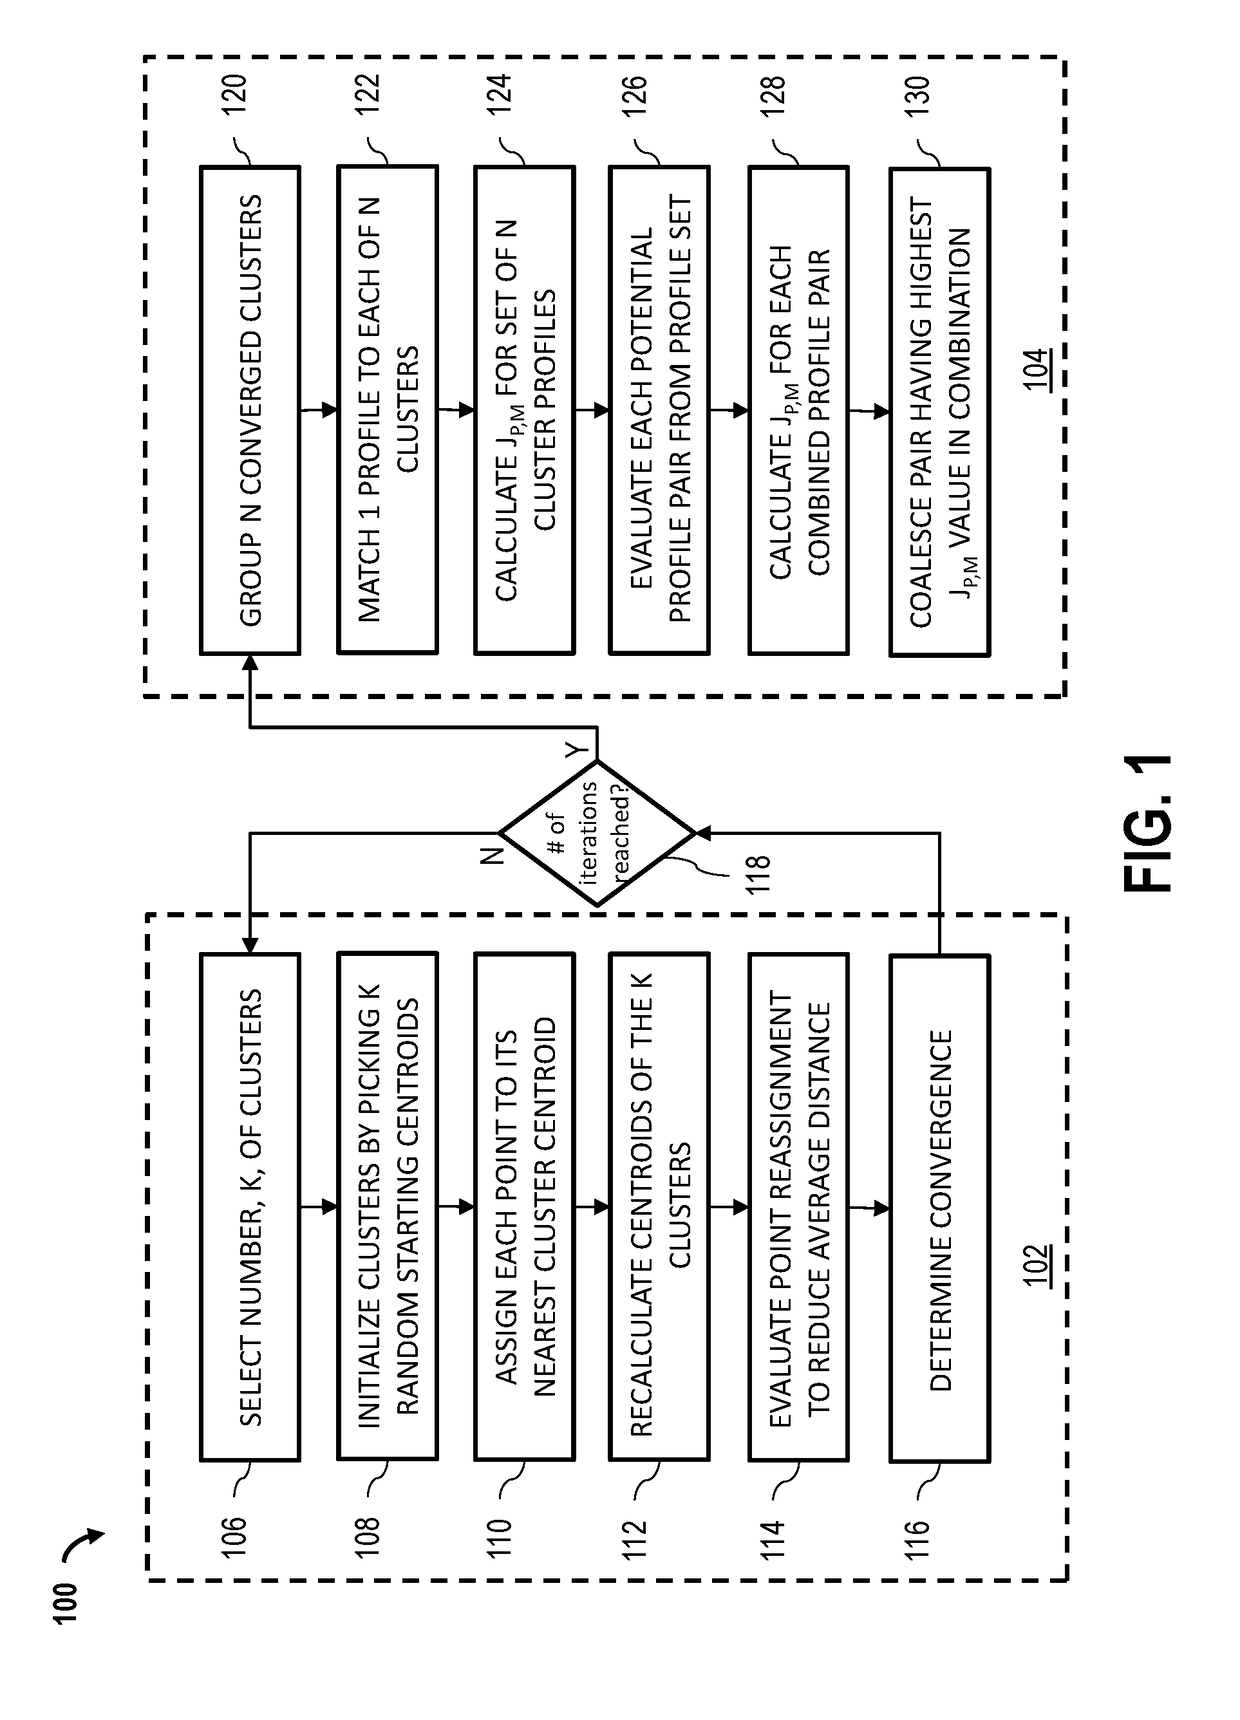 Systems and methods for docsis profile management